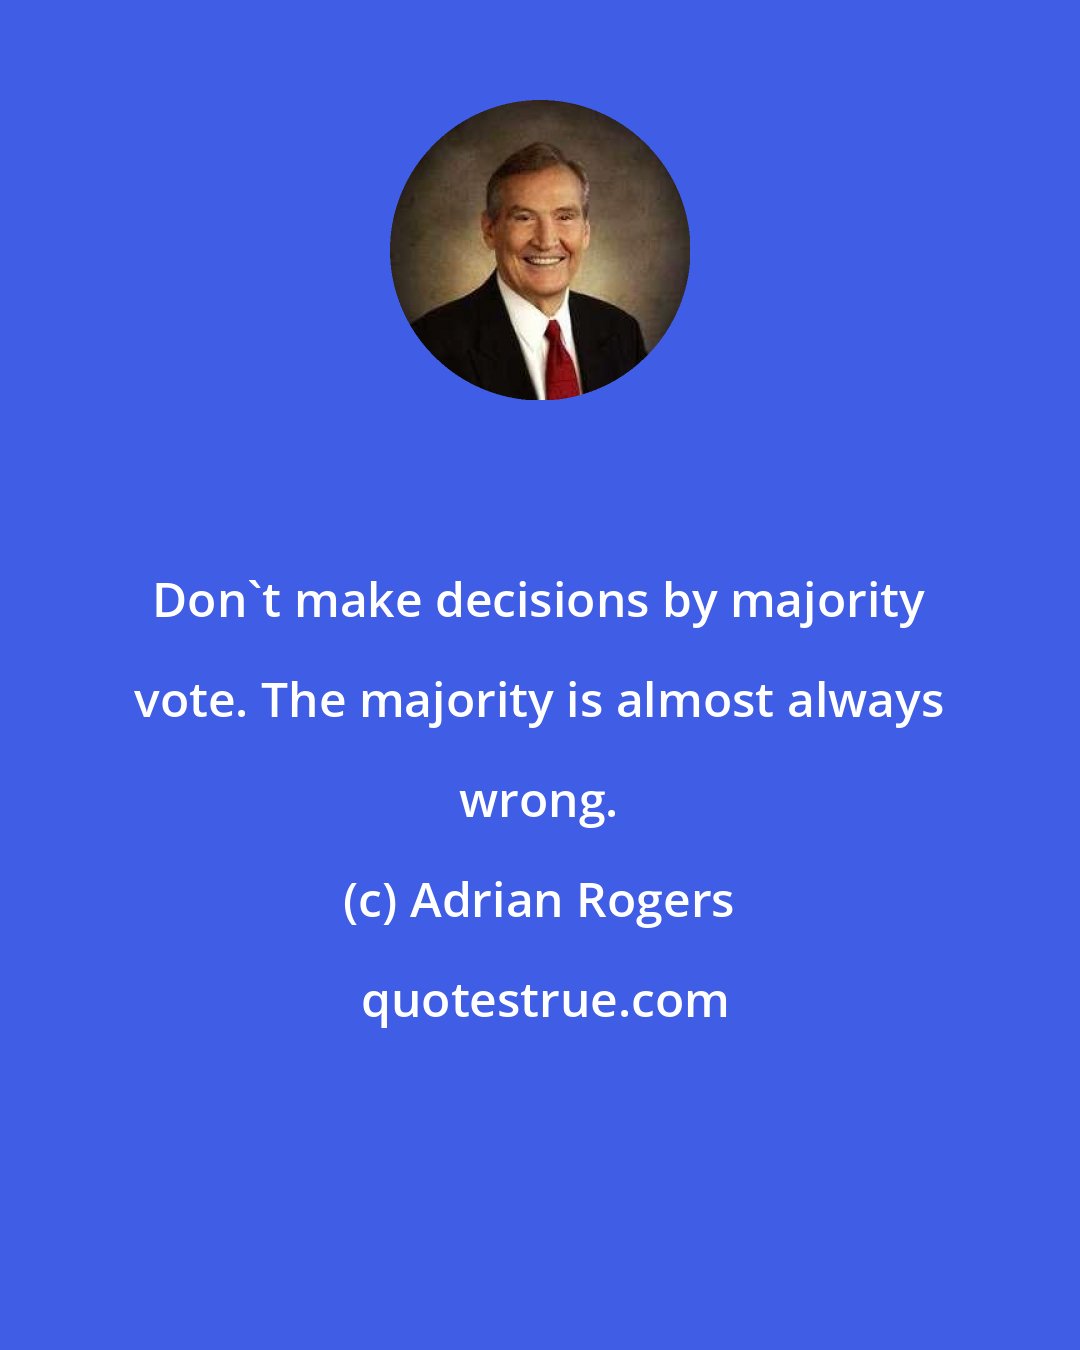 Adrian Rogers: Don't make decisions by majority vote. The majority is almost always wrong.